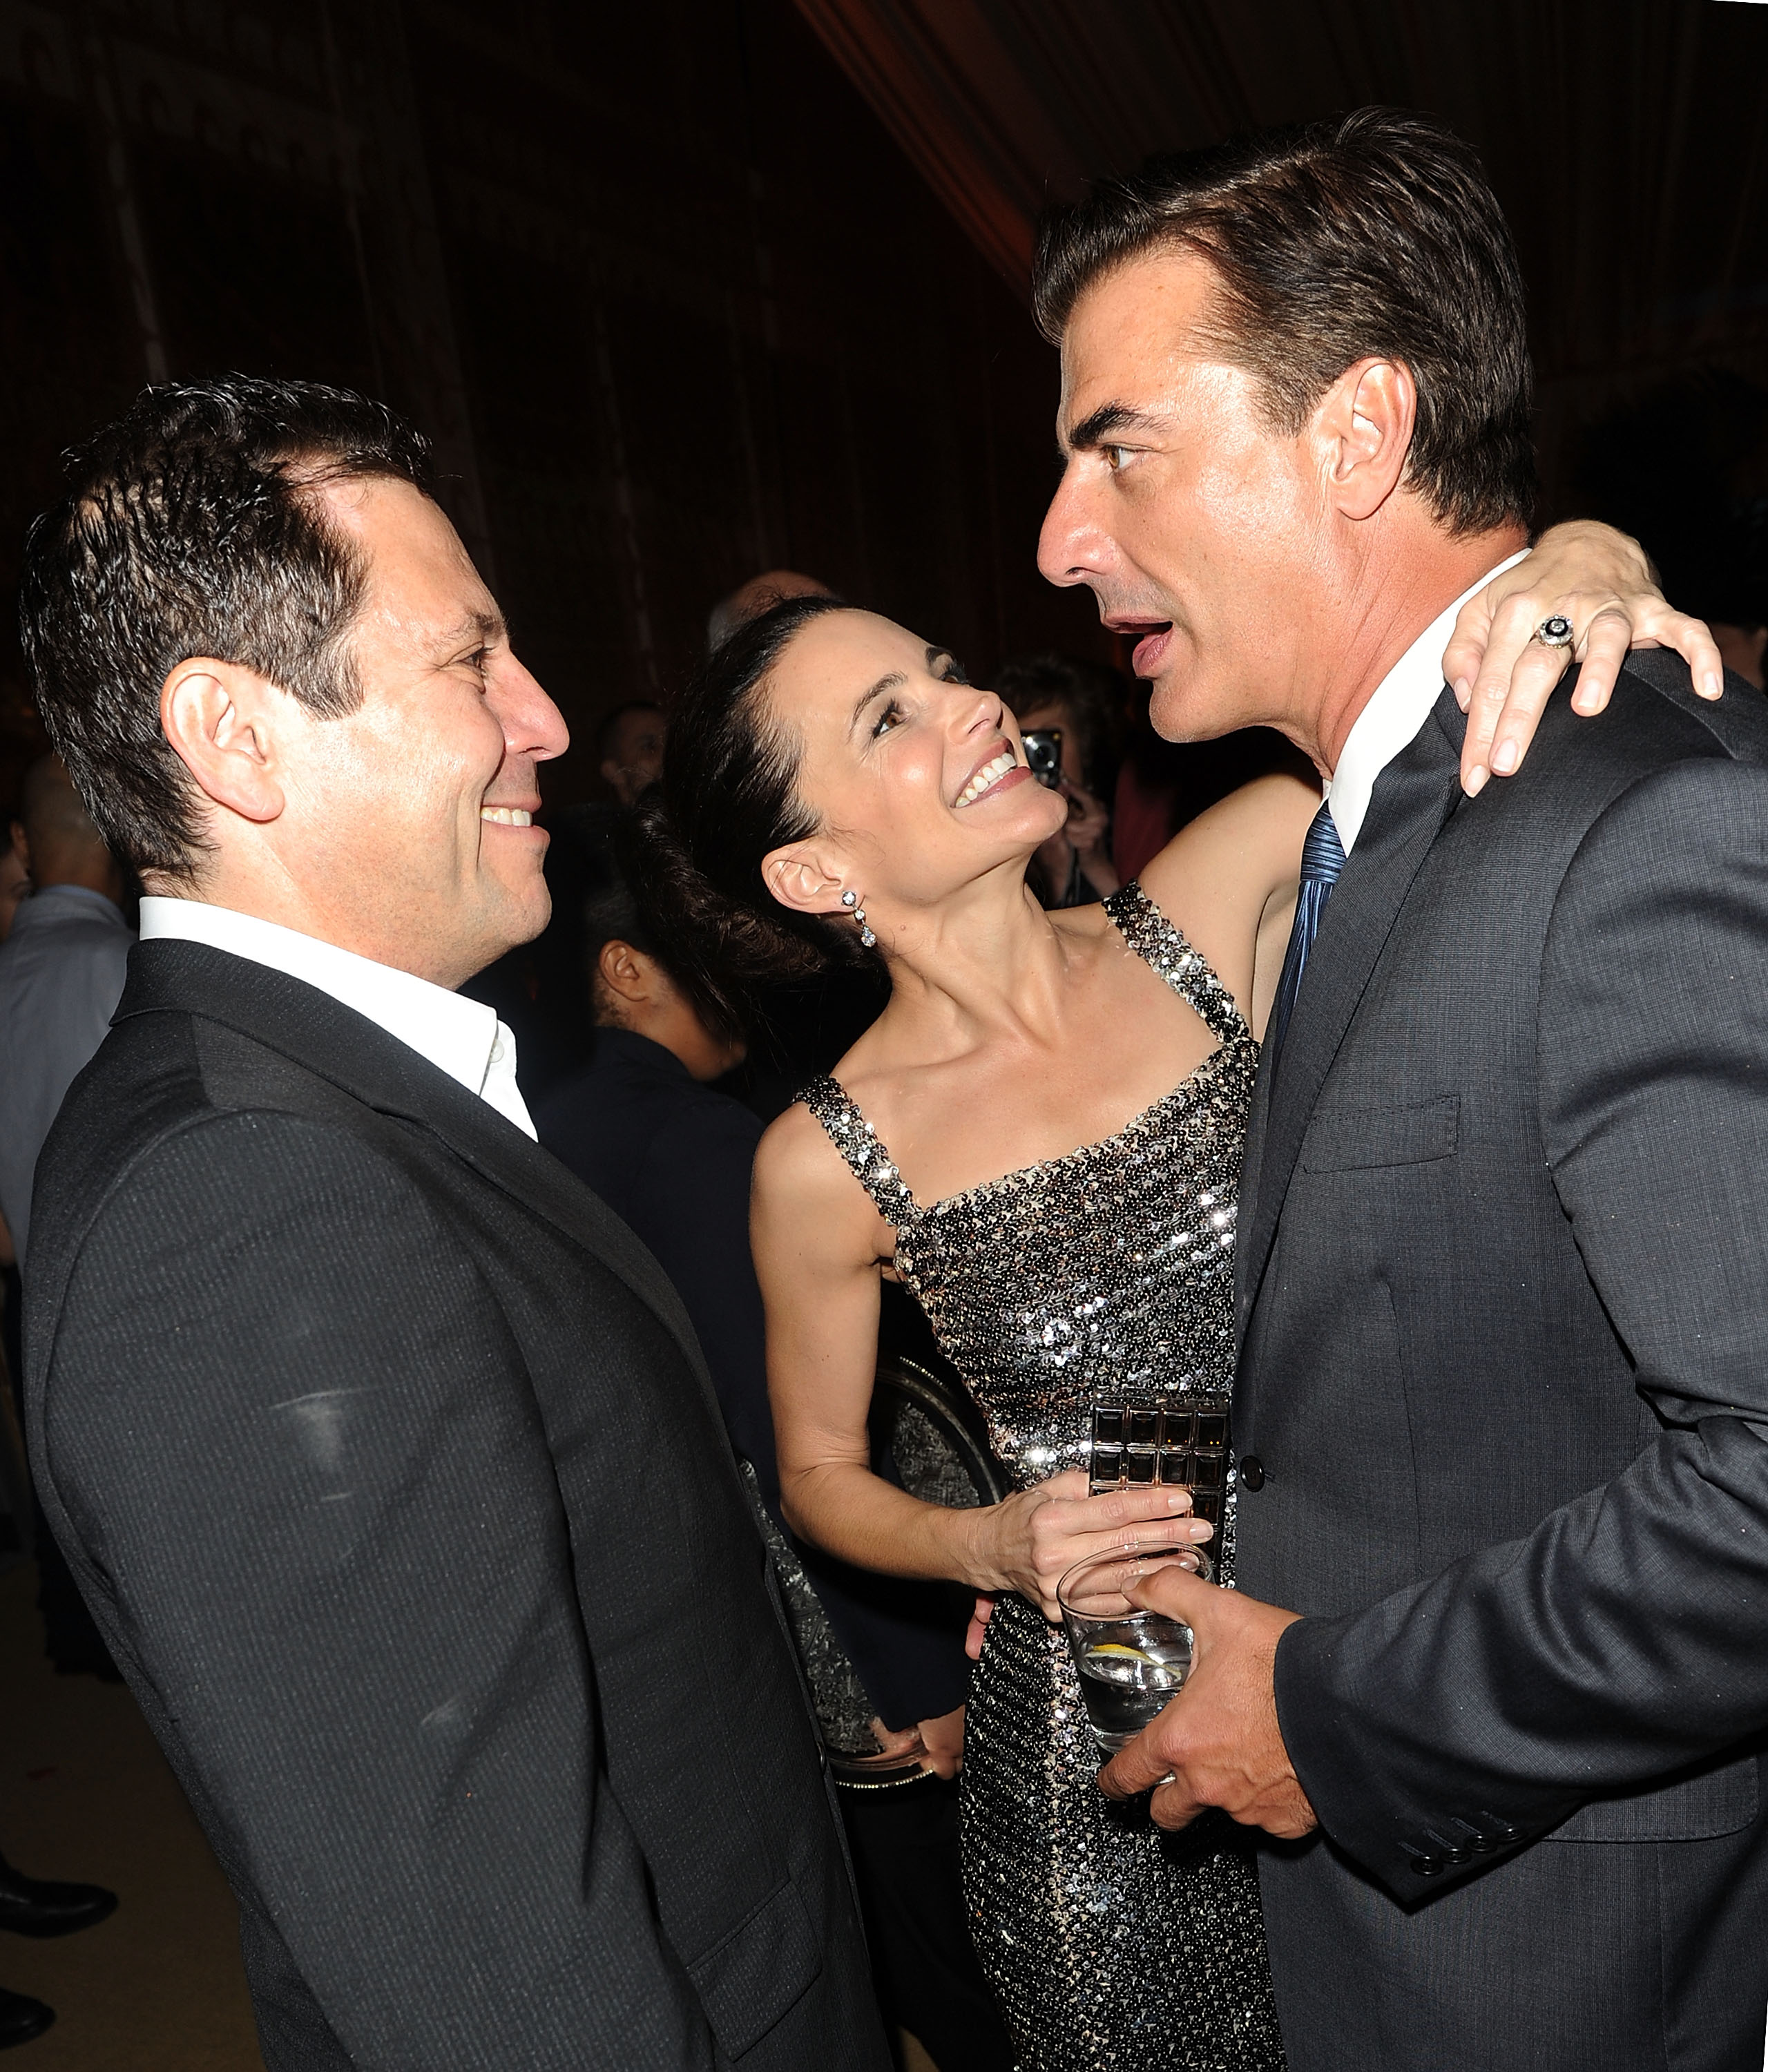 Darren Star, Kristin Davis, and Chris Noth attend the after party following the premiere of 'Sex and the City 2' at Lincoln Center for the Performing Arts